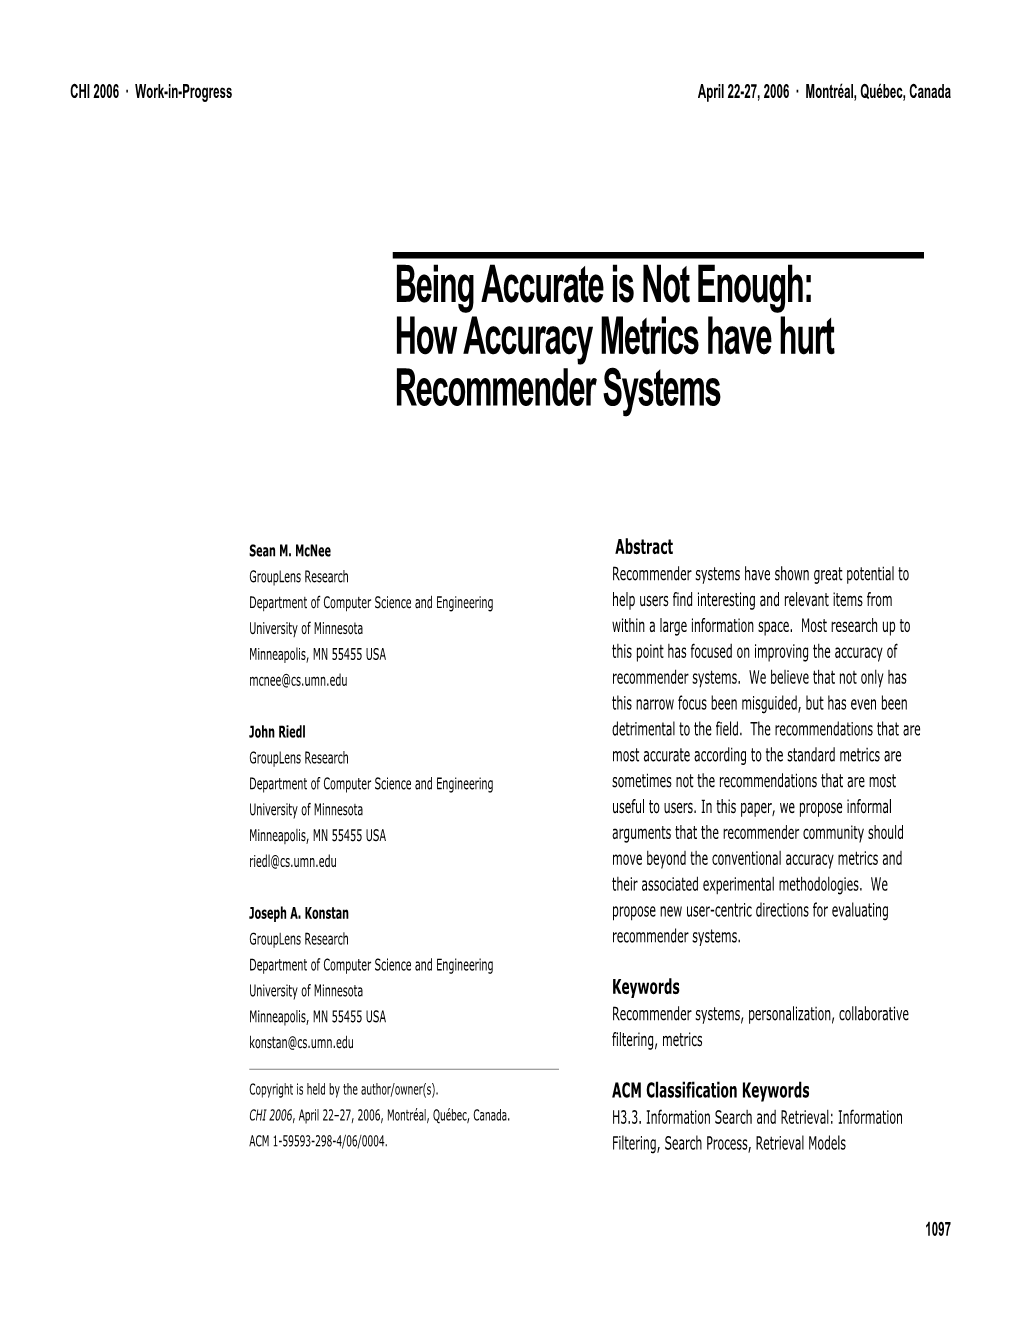 Being Accurate Is Not Enough: How Accuracy Metrics Have Hurt Recommender Systems